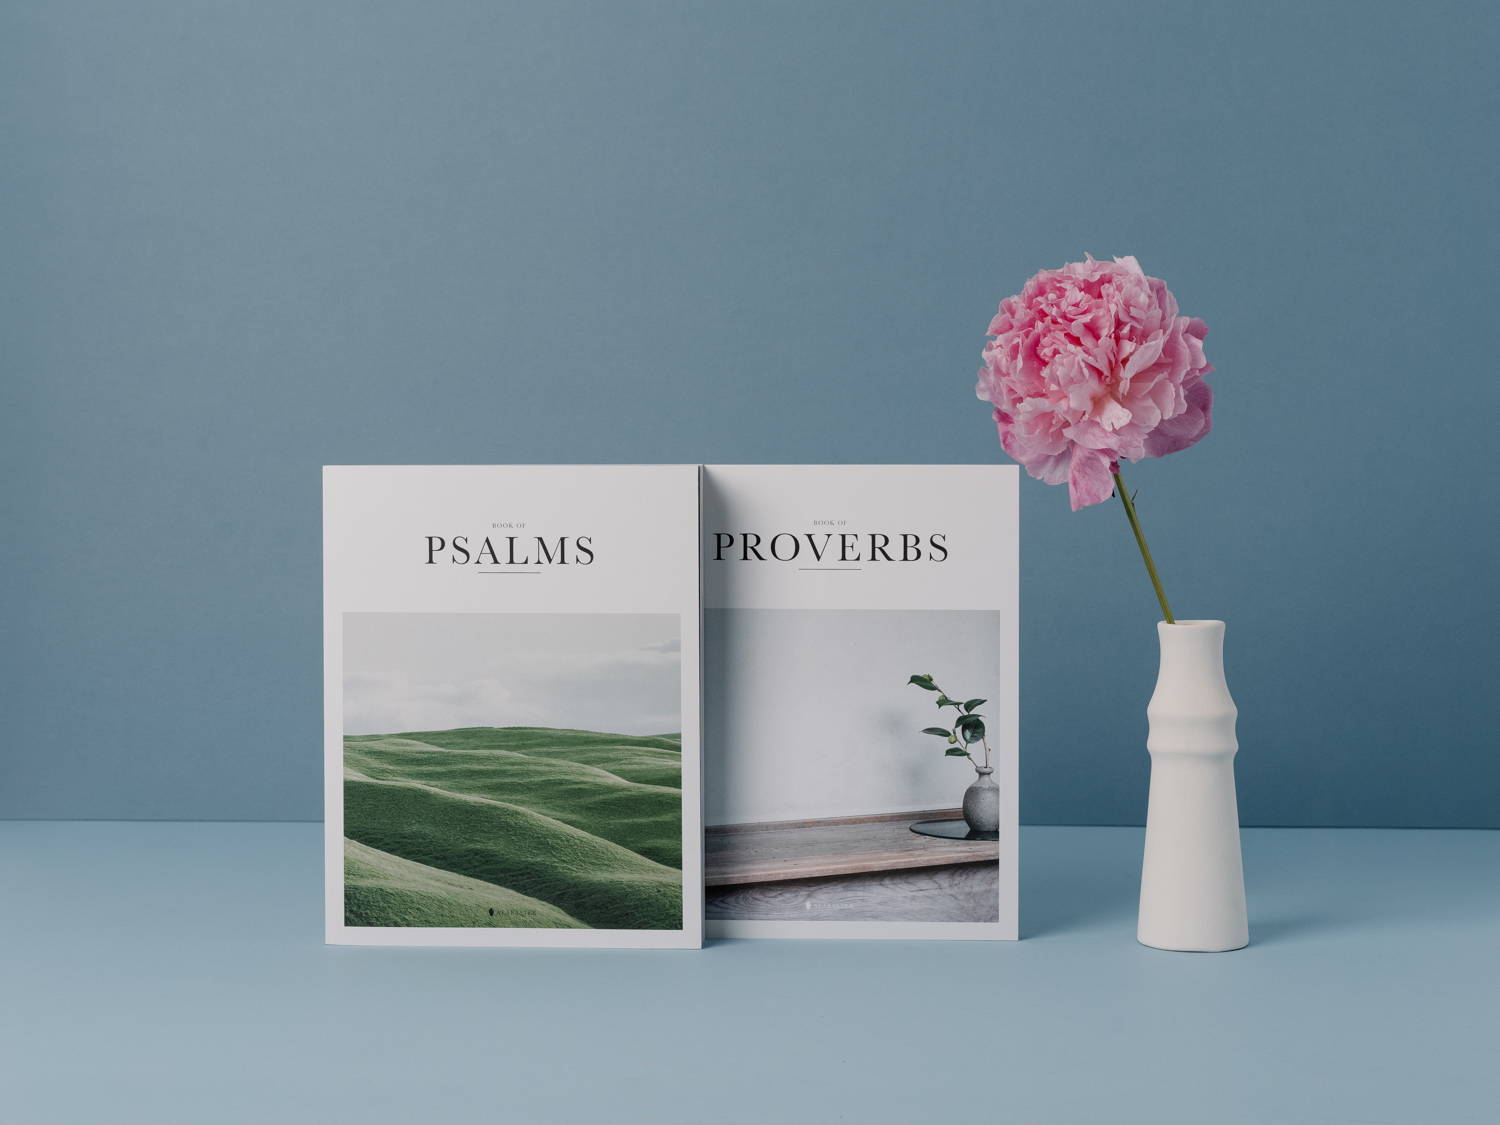 Alabaster Psalm and Proverbs with pink flower and blue background